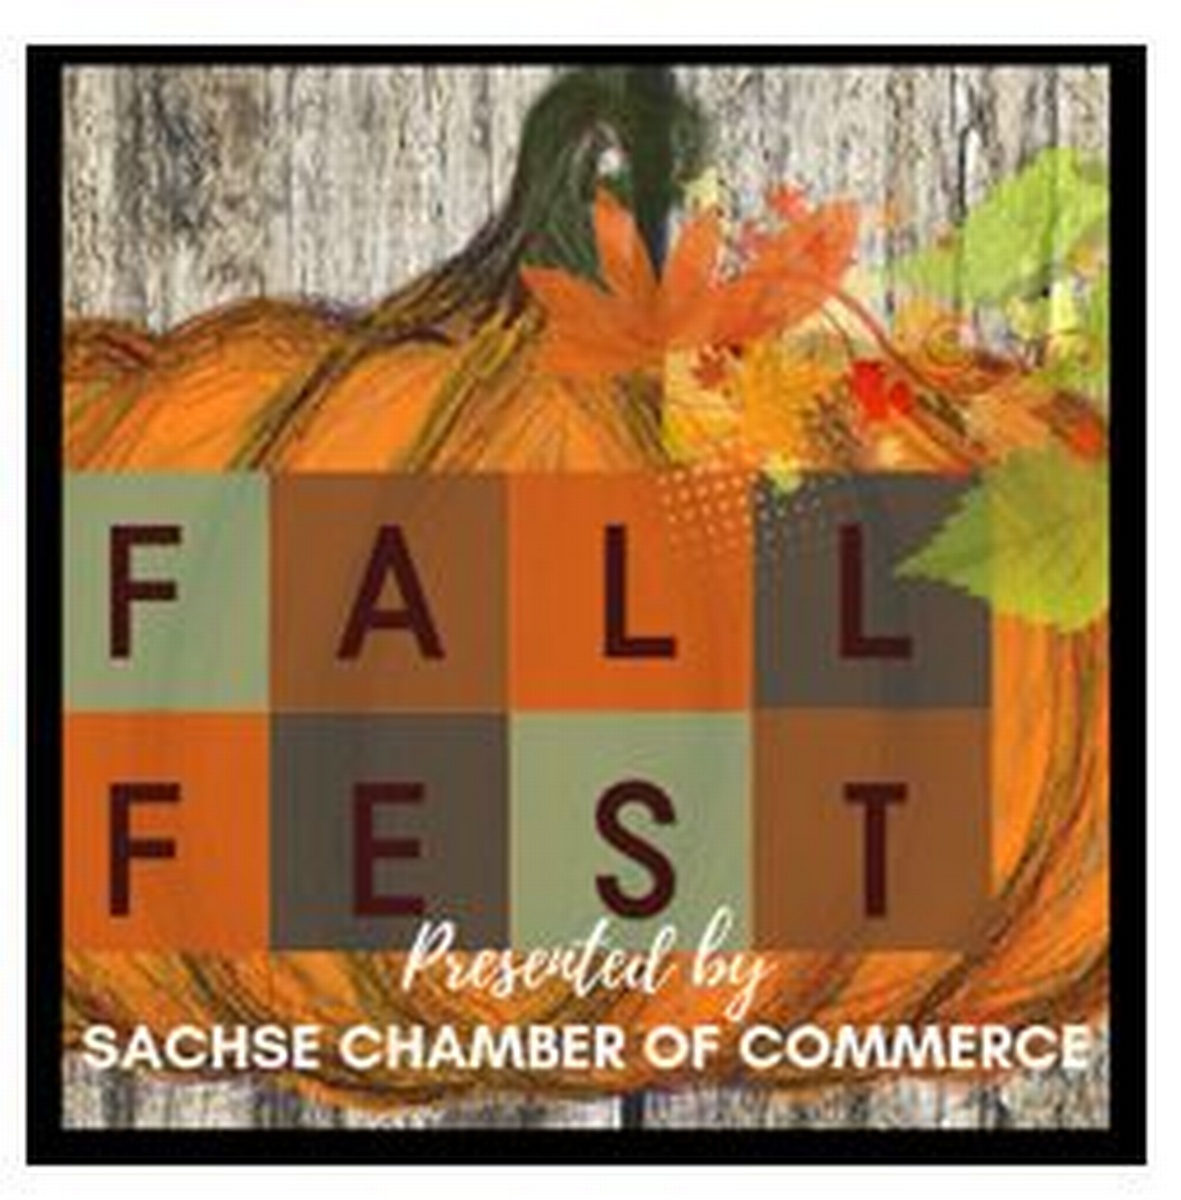 37th Annual Sachse Fallfest Oct 22, 2022 PublicLayout Sachse